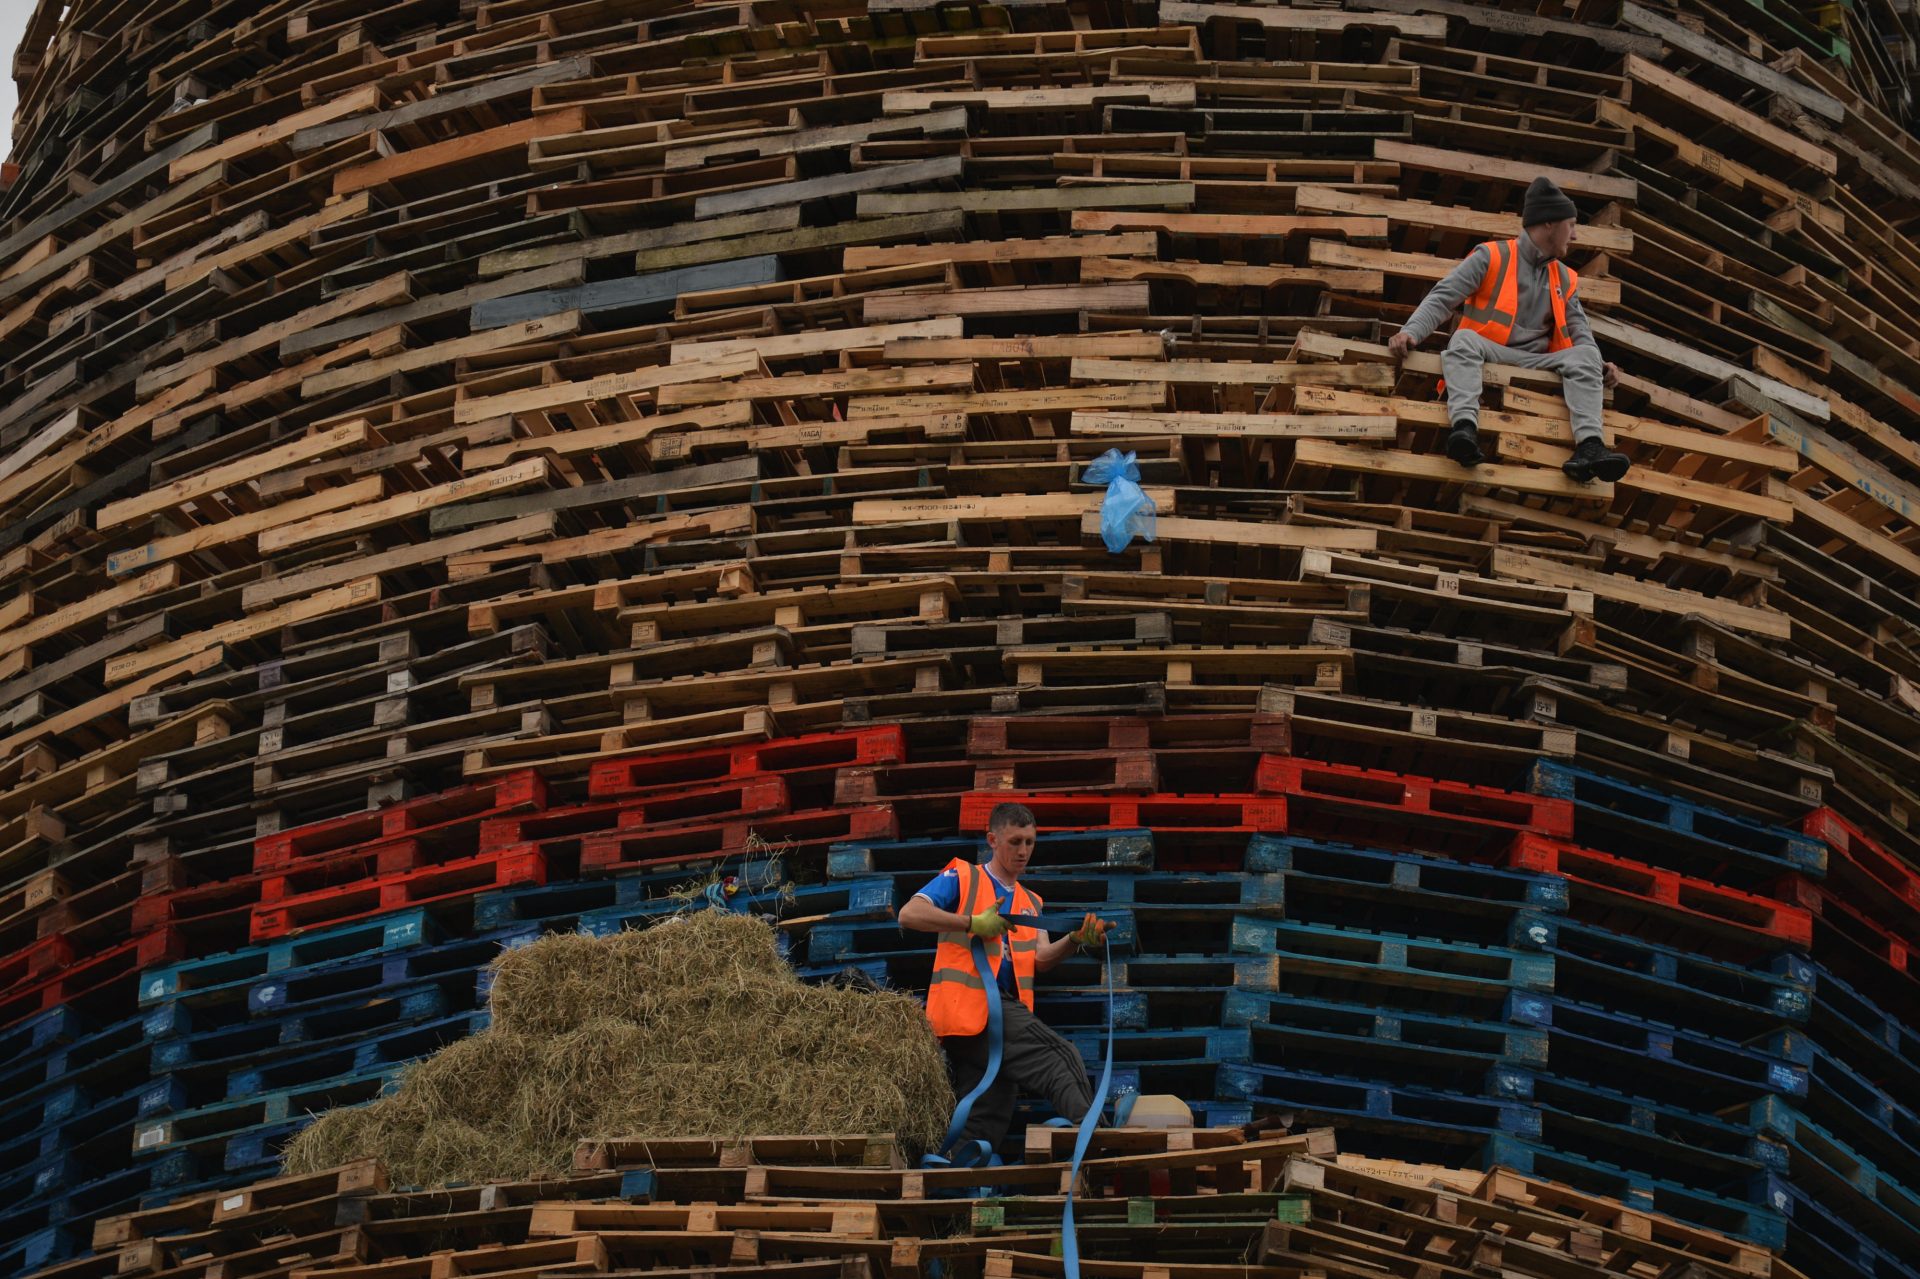 Bonfire builders in Craigy Hill, Larne, ahead of Protestant ‘Twelfth’ celebrations this summer, which saw large gatherings. This bonfire consisted of 17,000 pallets and was 45m high. Photo: NurPhoto via Getty Images.